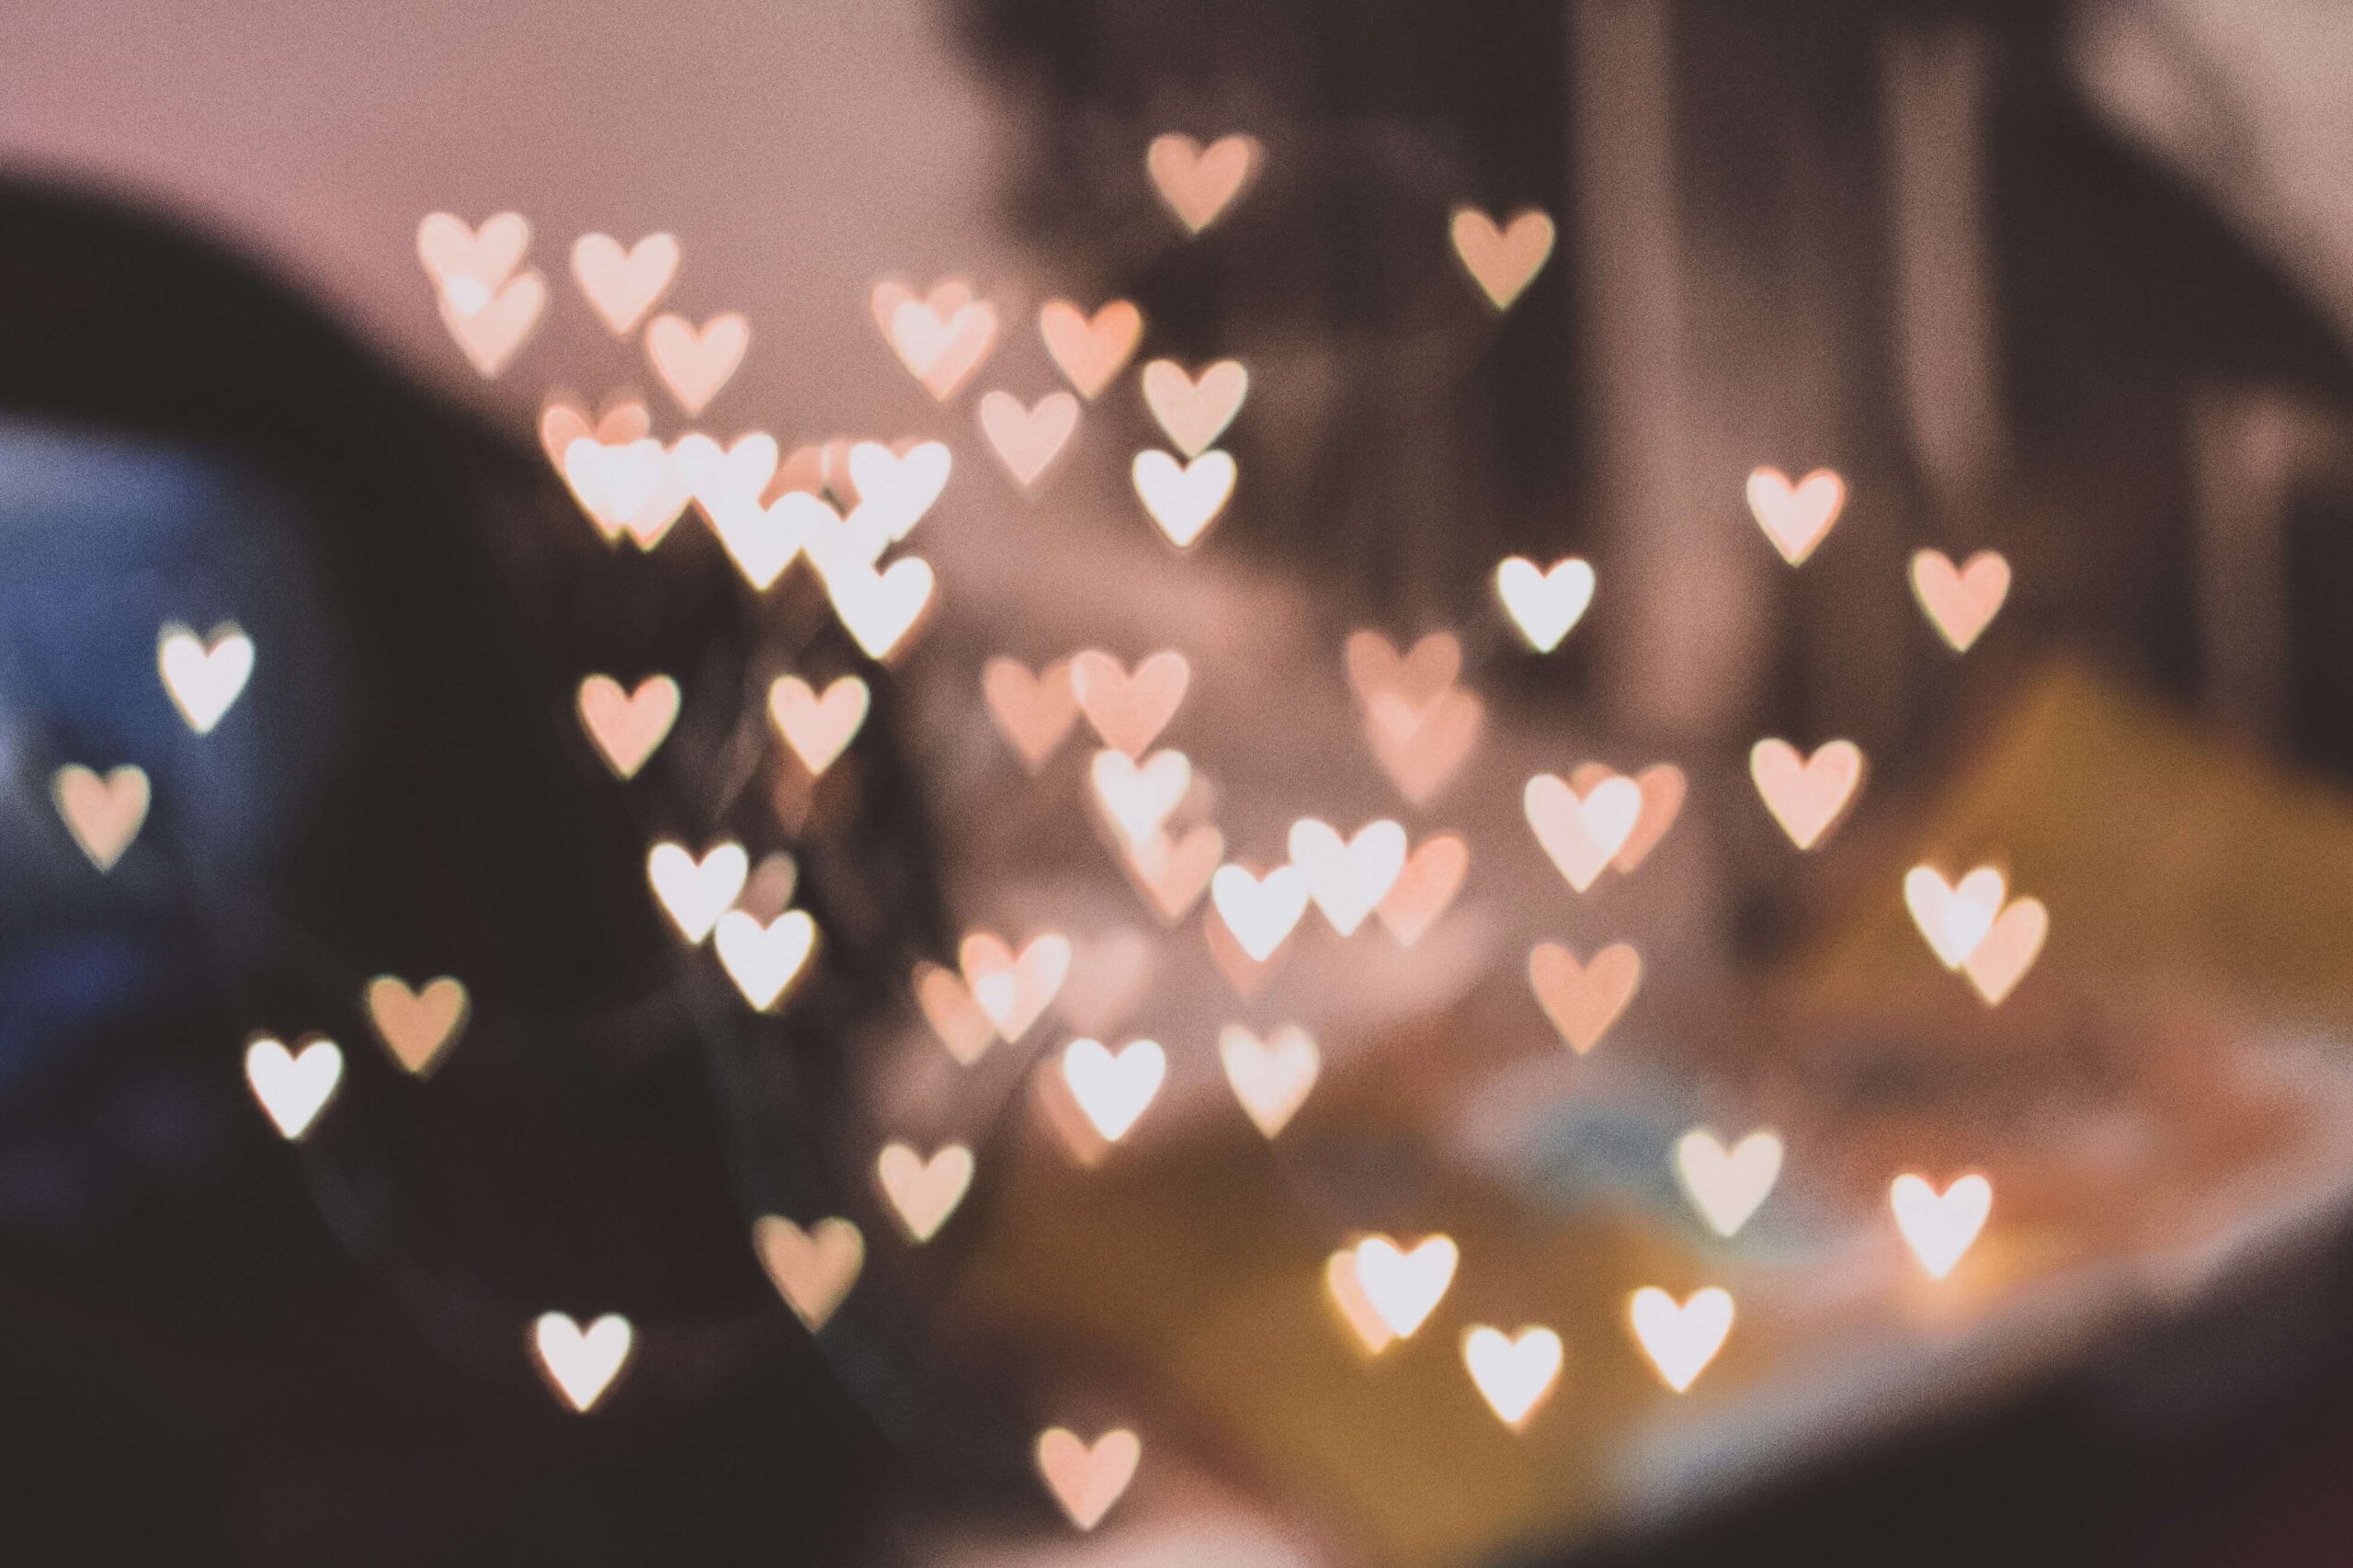 A picture of blurry lights shaped into hearts. If you struggle with anxiety, learn how self-compassion can help alleviate those feelings. Learn more in NYC anxiety counseling.